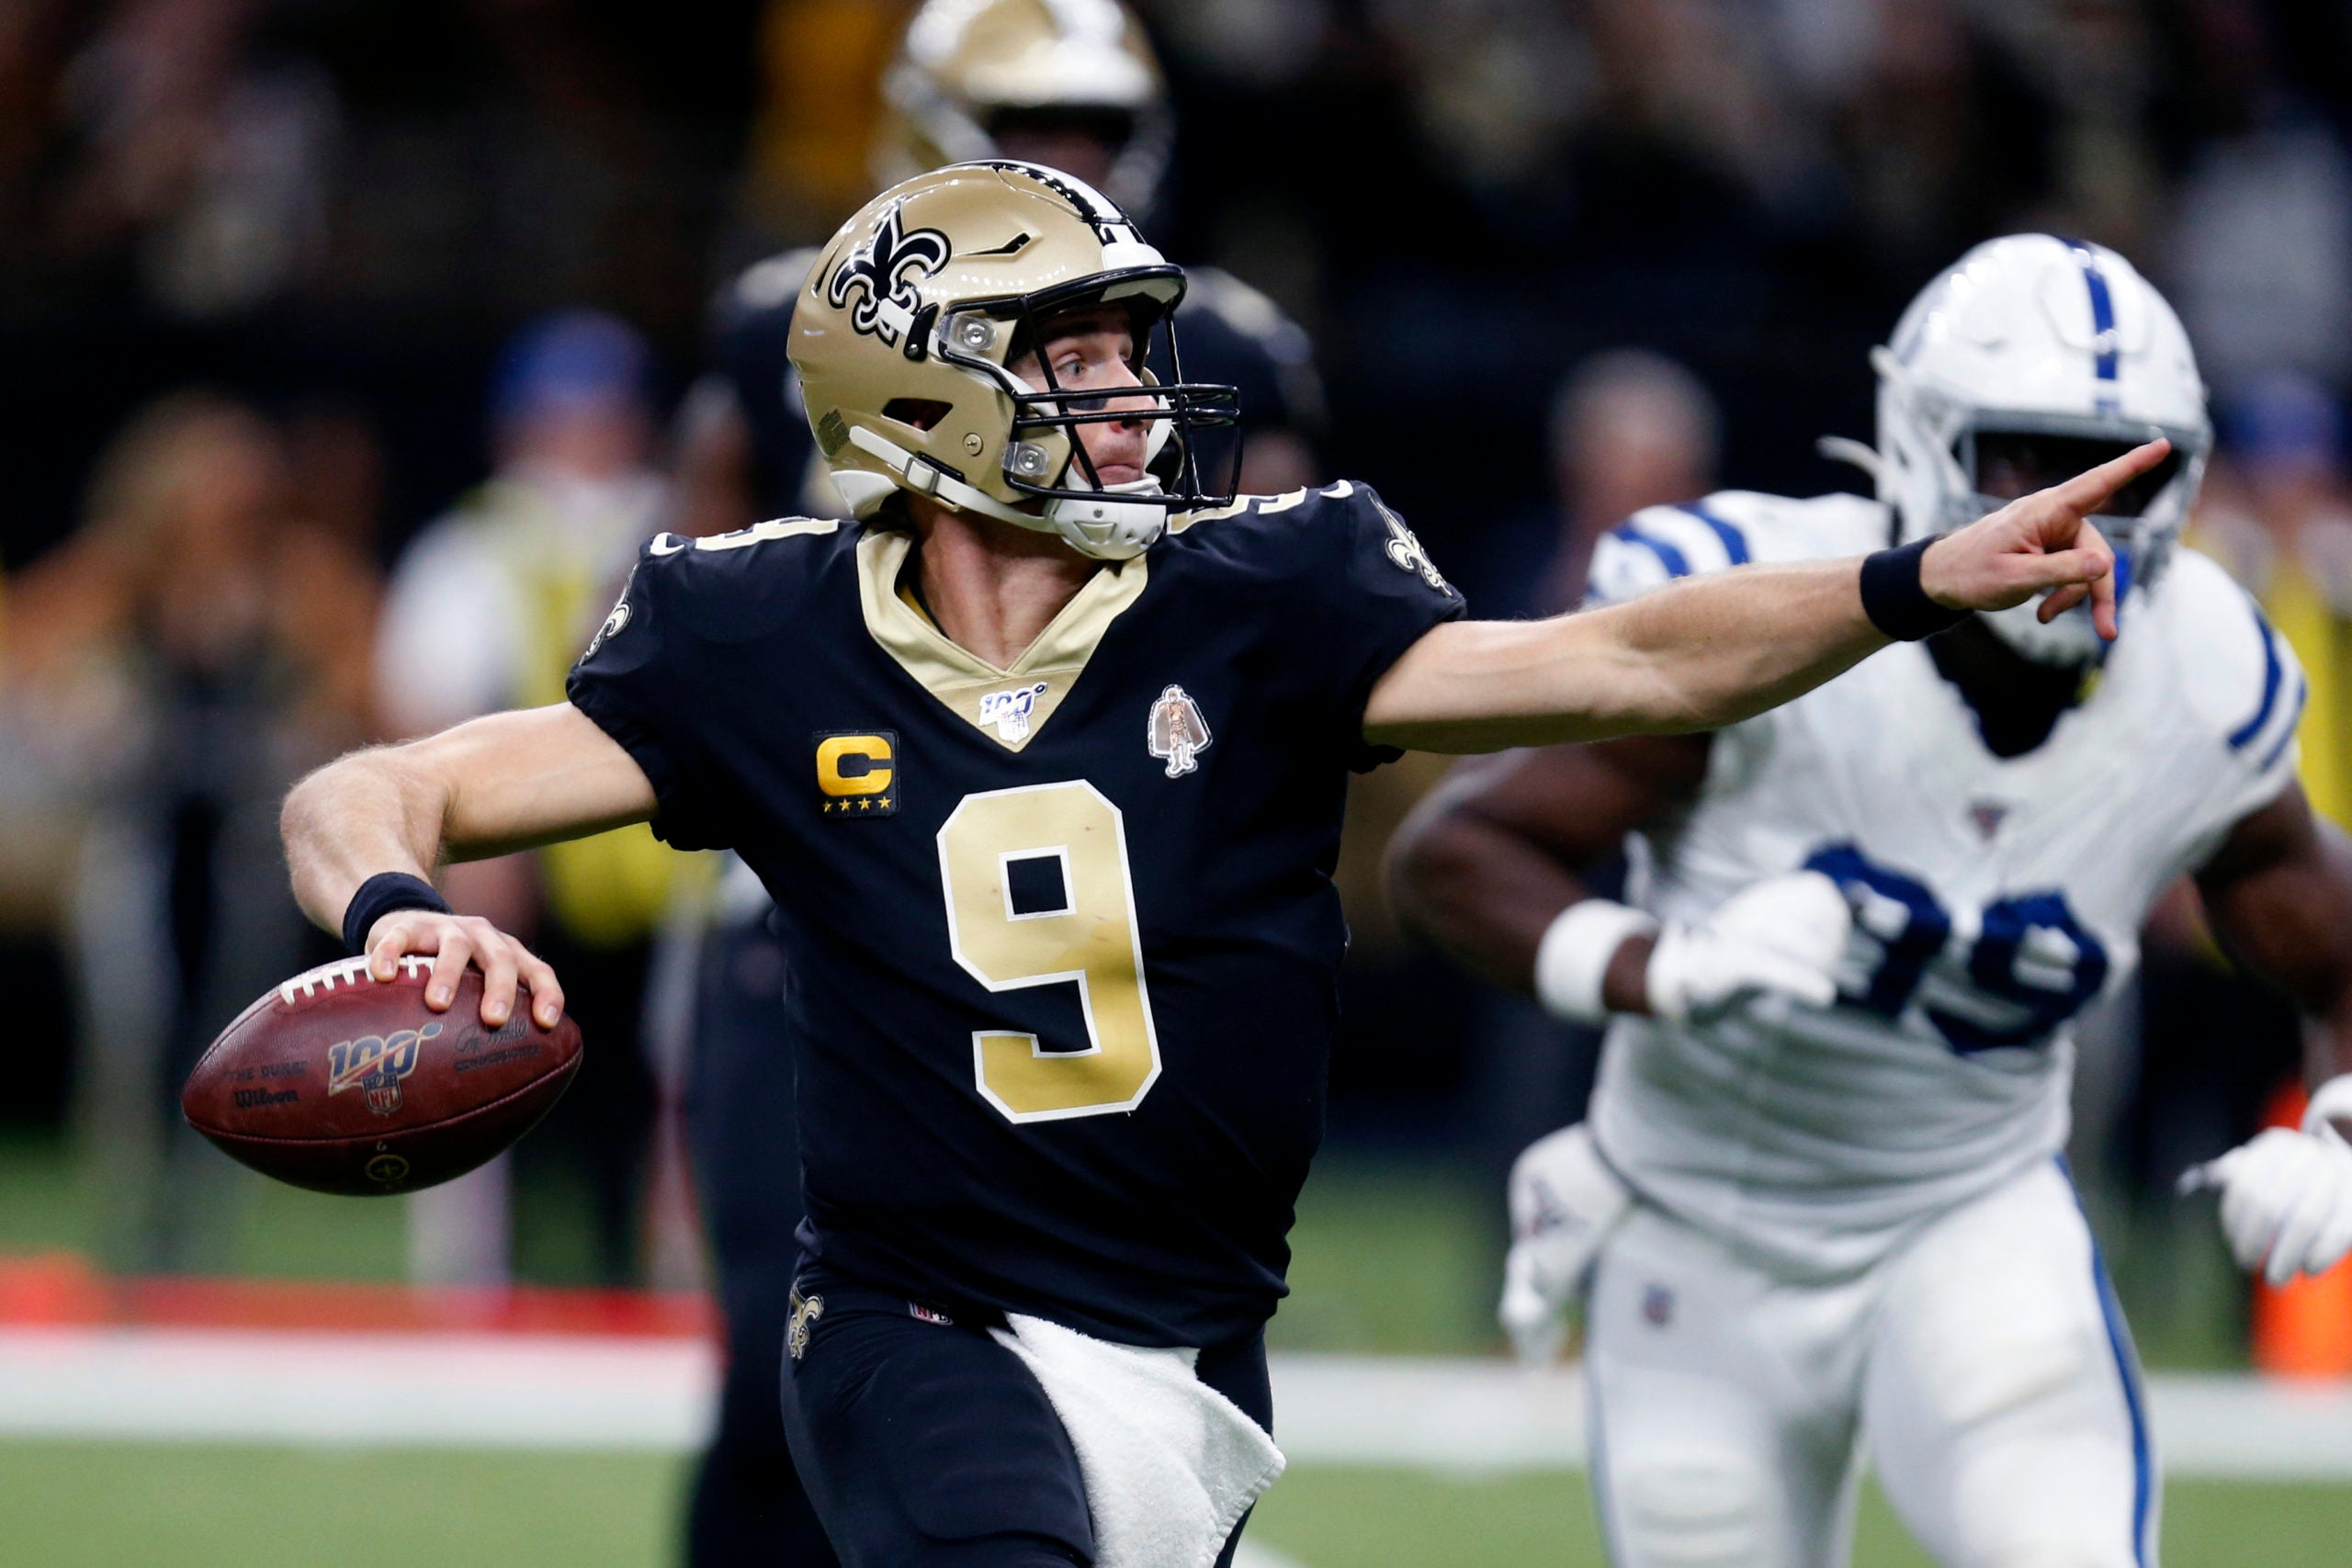 Brees sets NFL all-time TD mark as Saints crush Colts 34-7.